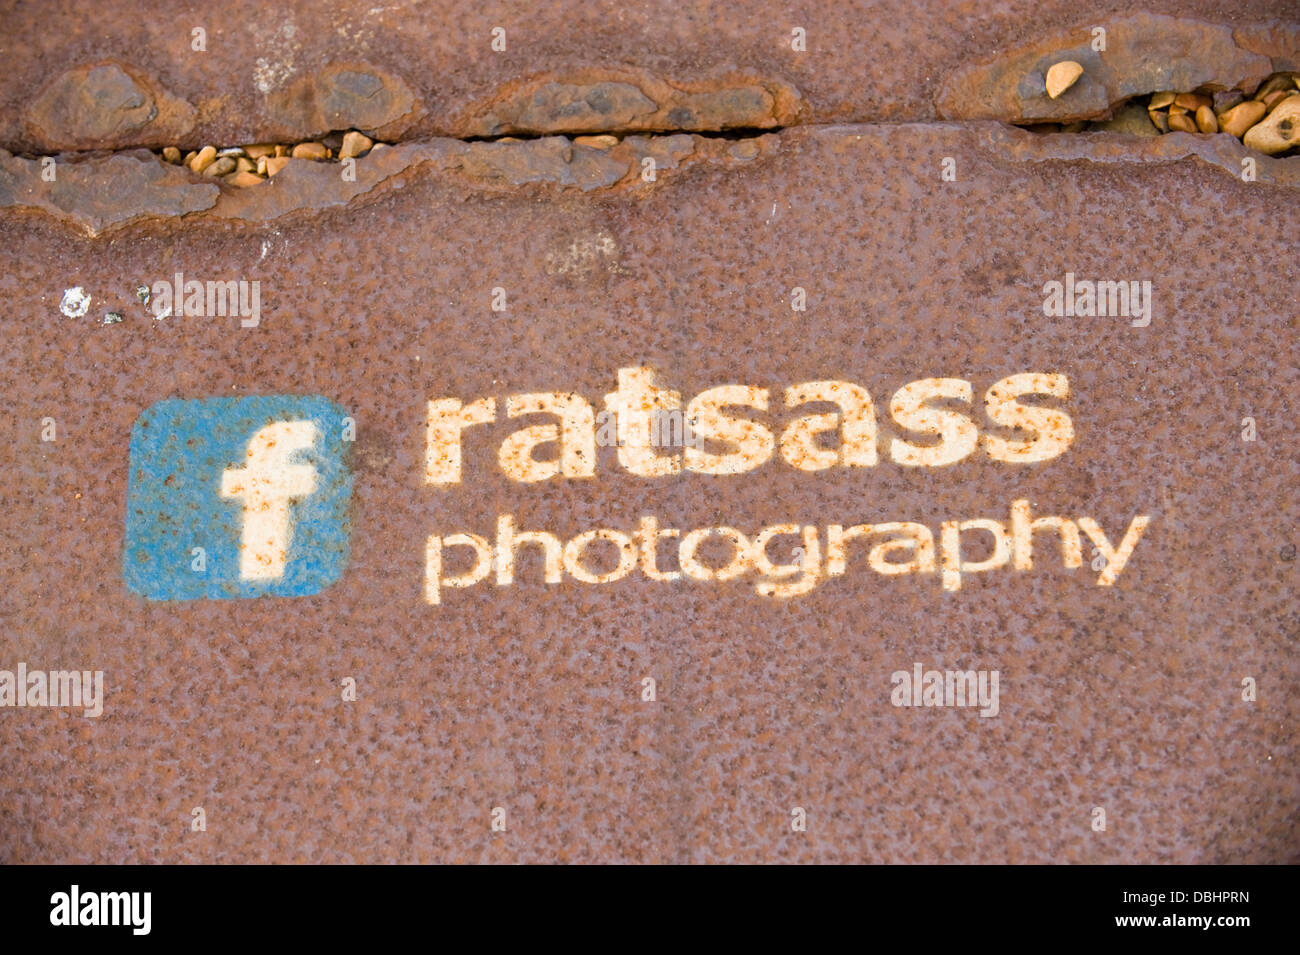 Facebook graffiti for ratsass photography on seafront in Brighton East Sussex England UK Stock Photo